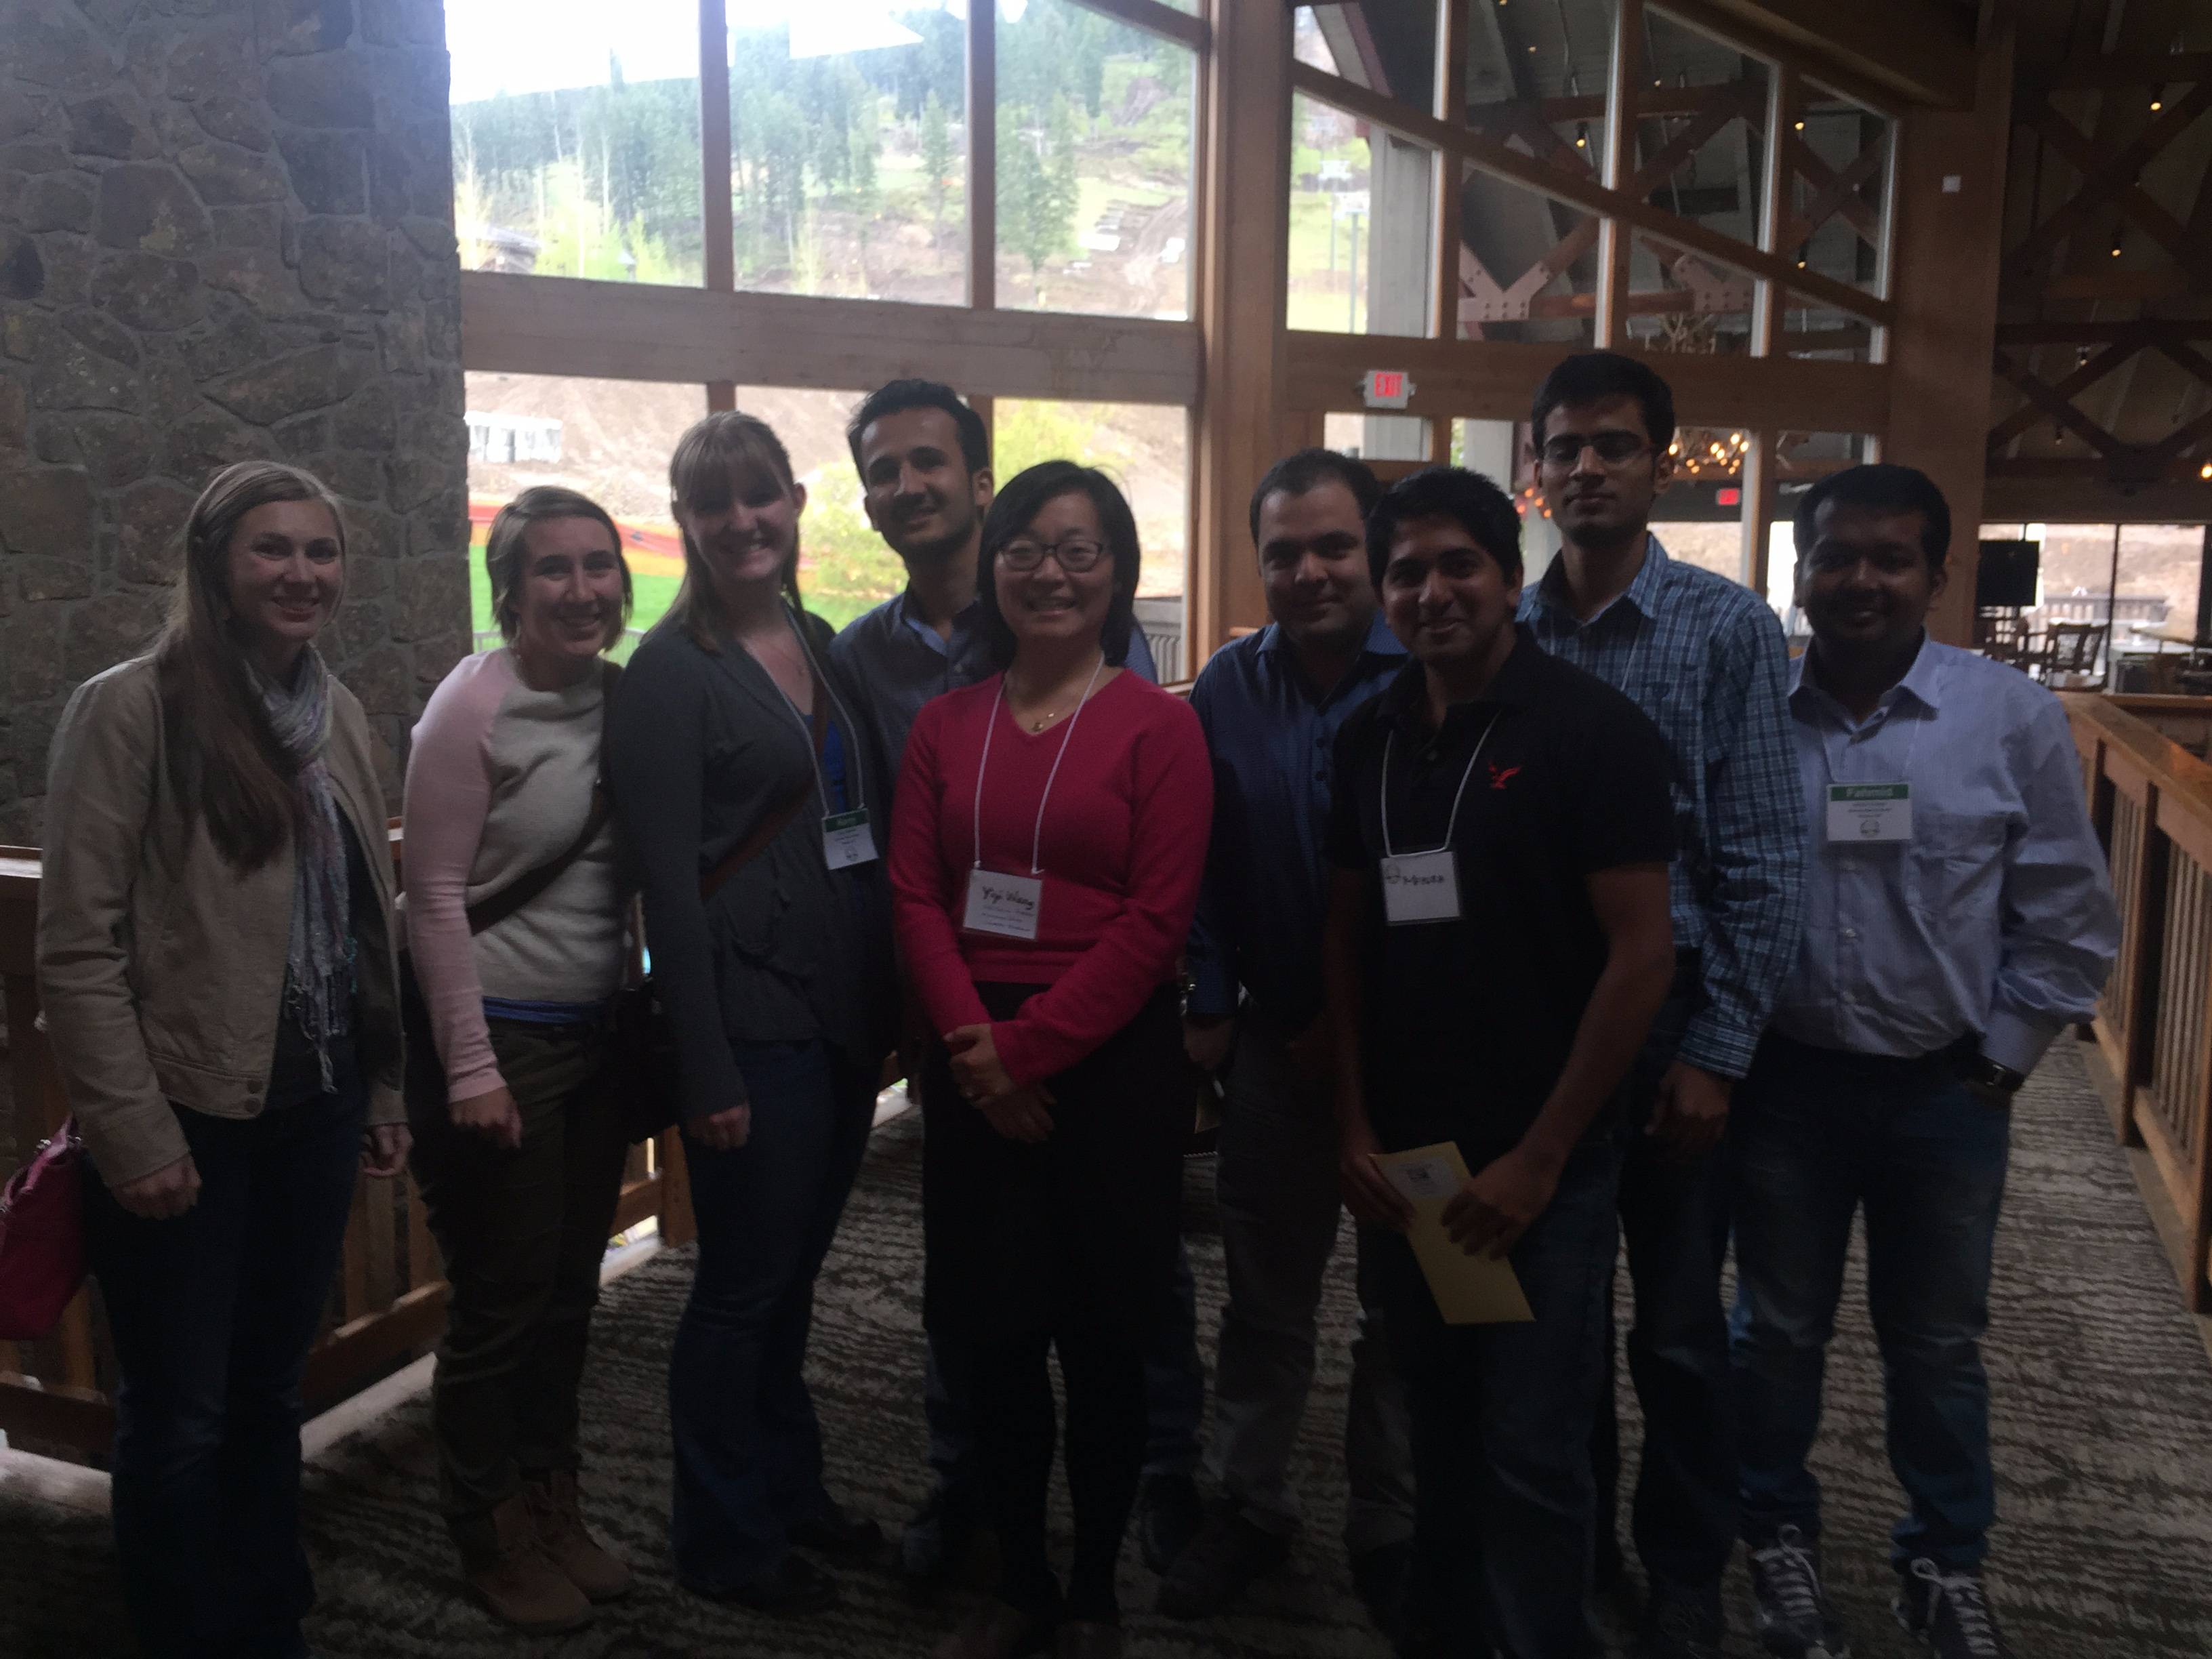 Institute of Transportation Engineers Intermountain Conference 2015, Jackson Hole, Wyoming